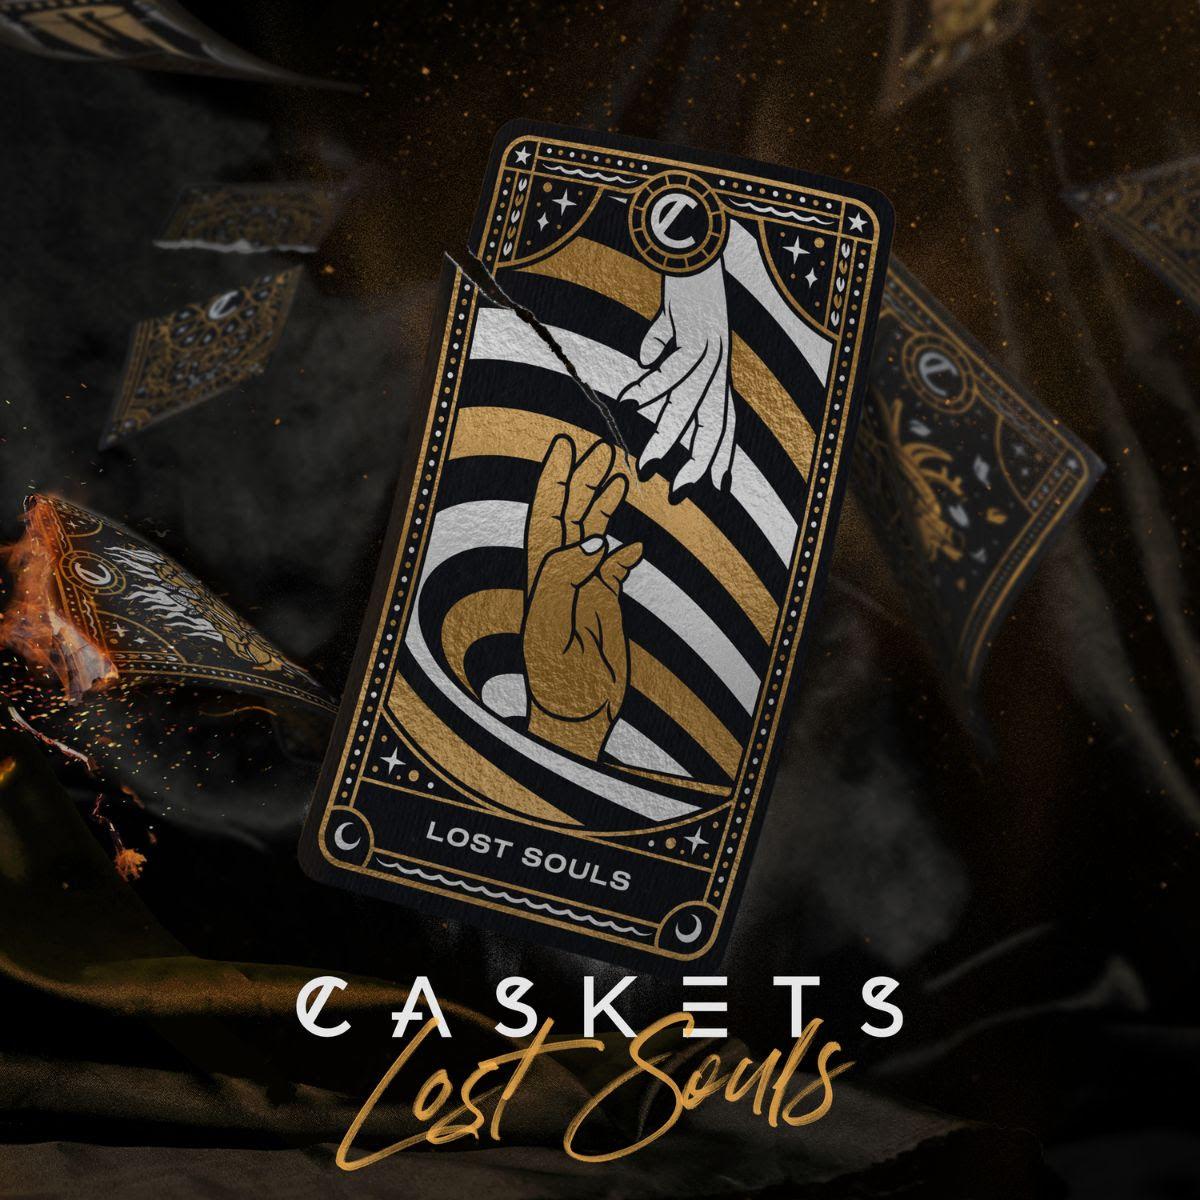 Caskets lost souls cover